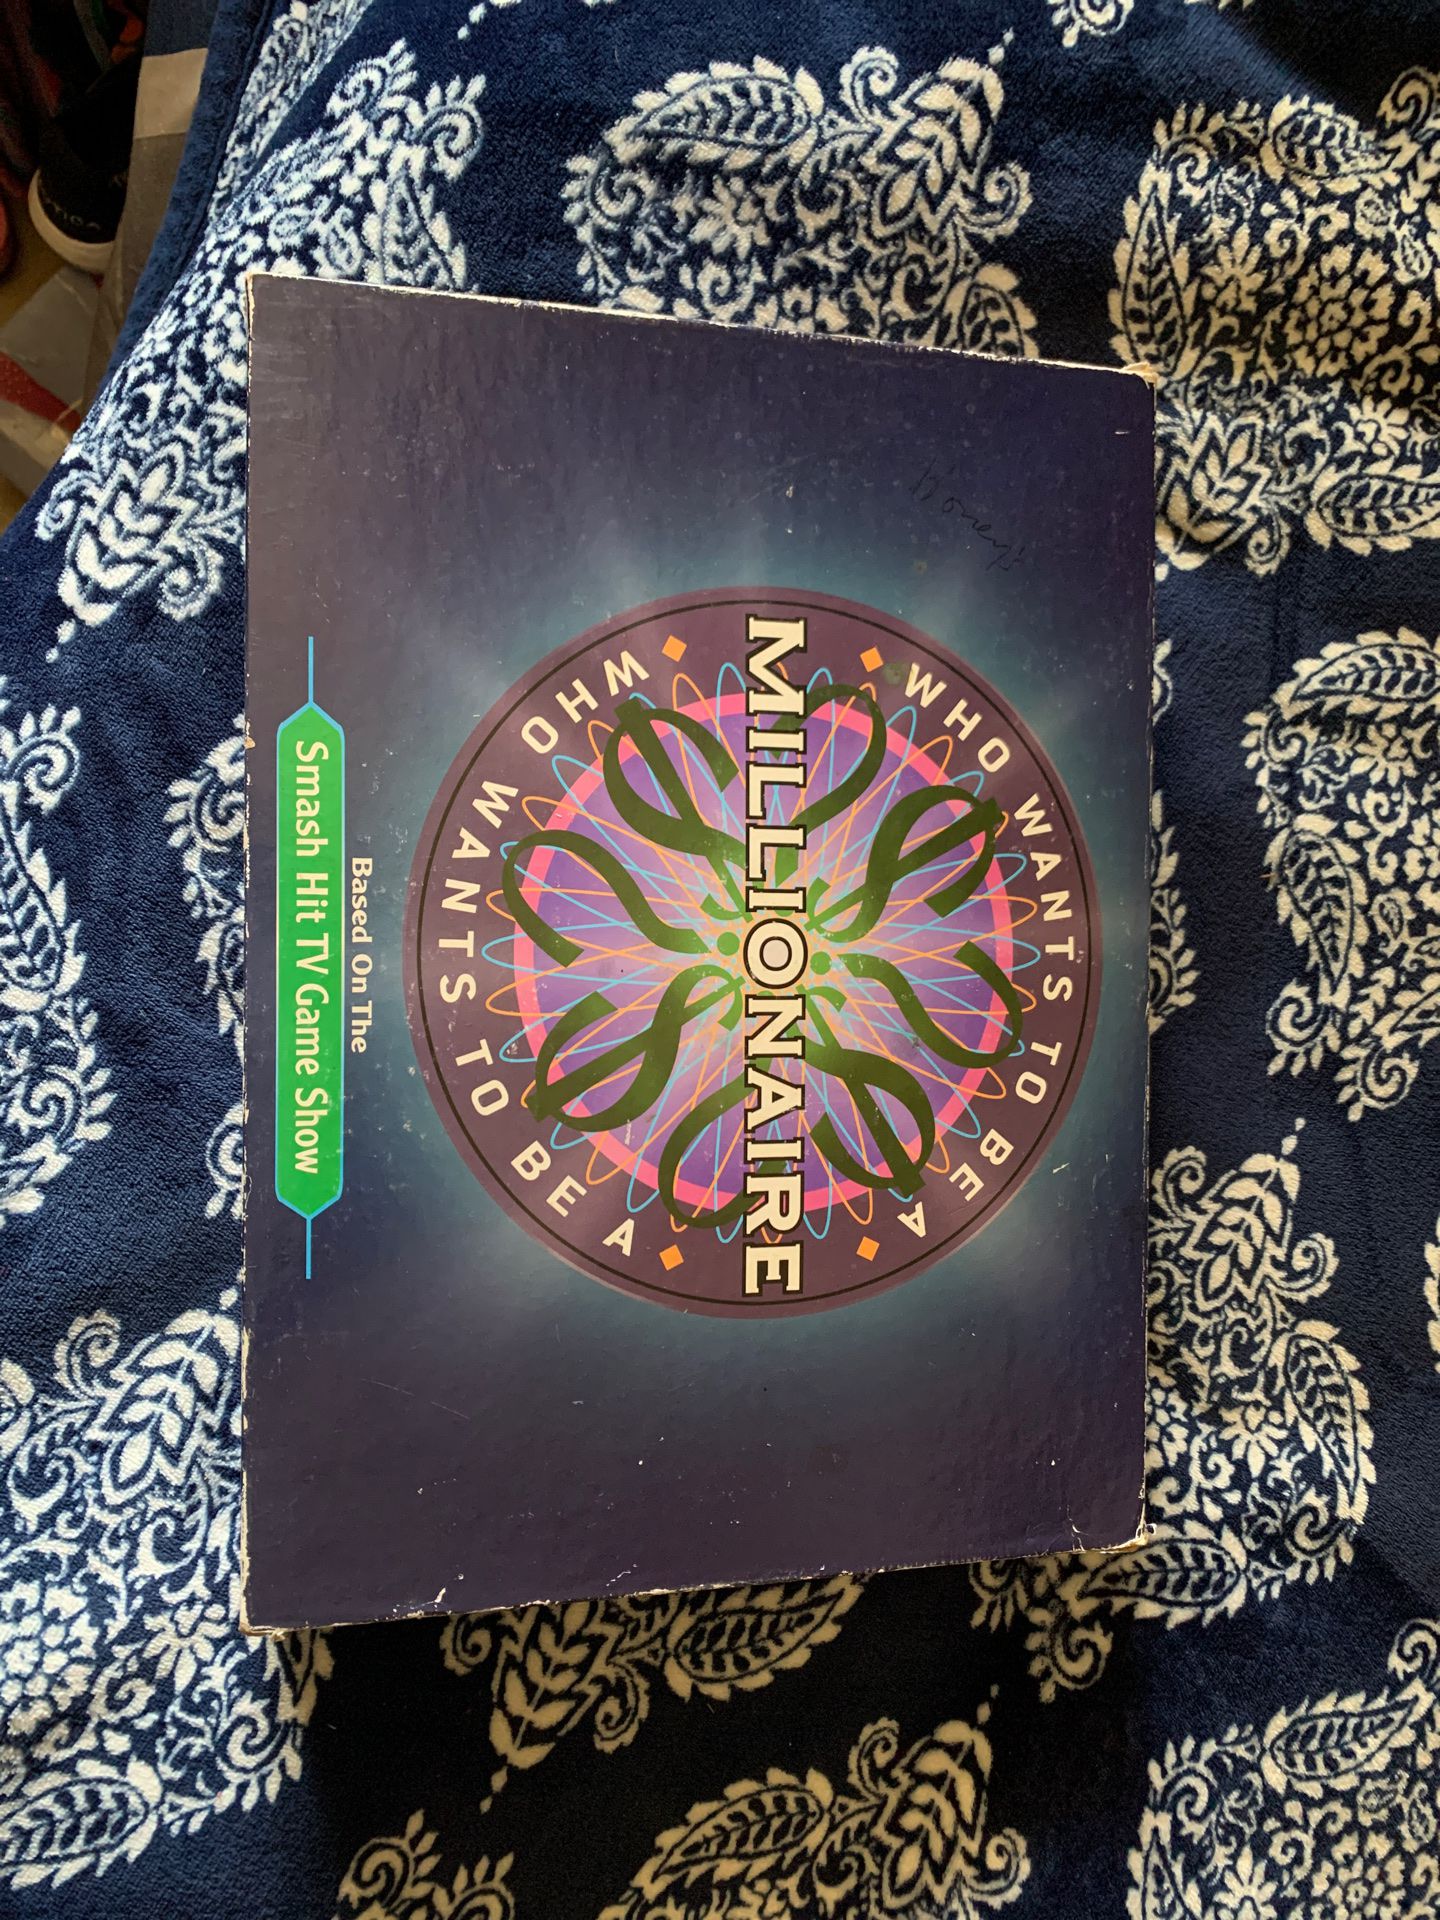 Who wants to be a millionaire board game